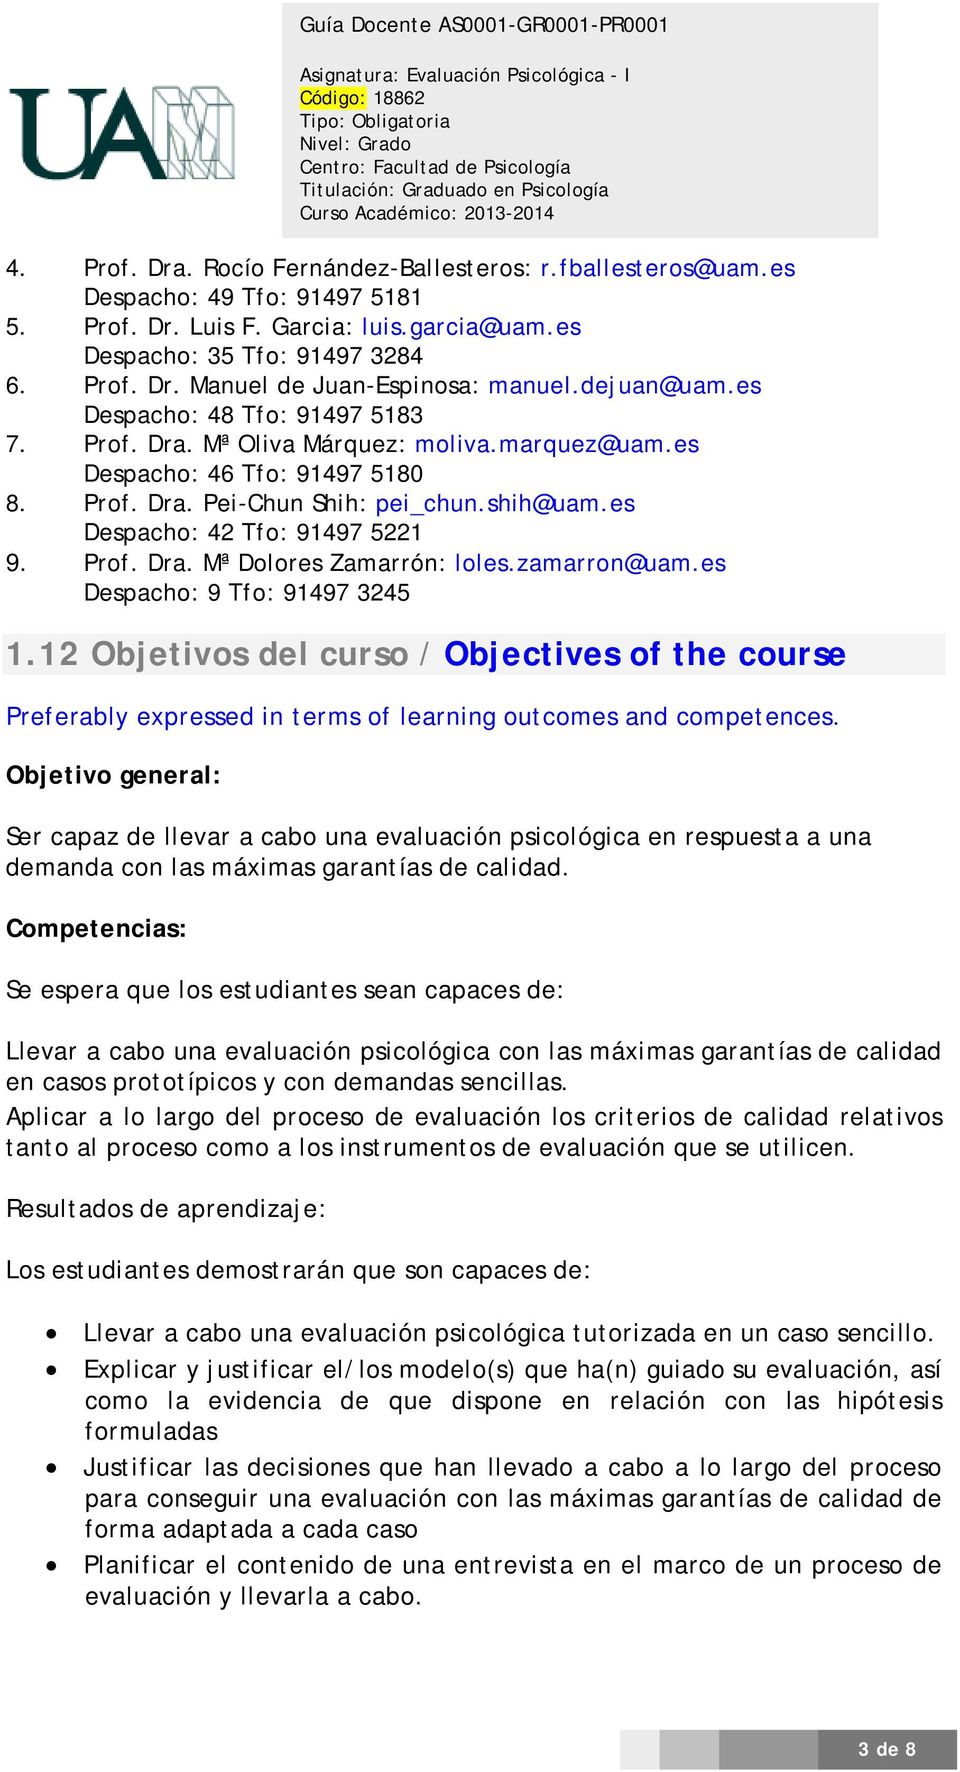 Prf. Dra. Mª Dlres Zamarrón: lles.zamarrn@uam.es Despach: 9 Tf: 91497 3245 1.12 Objetivs del curs / Objectives f the curse Preferably expressed in terms f learning utcmes and cmpetences.